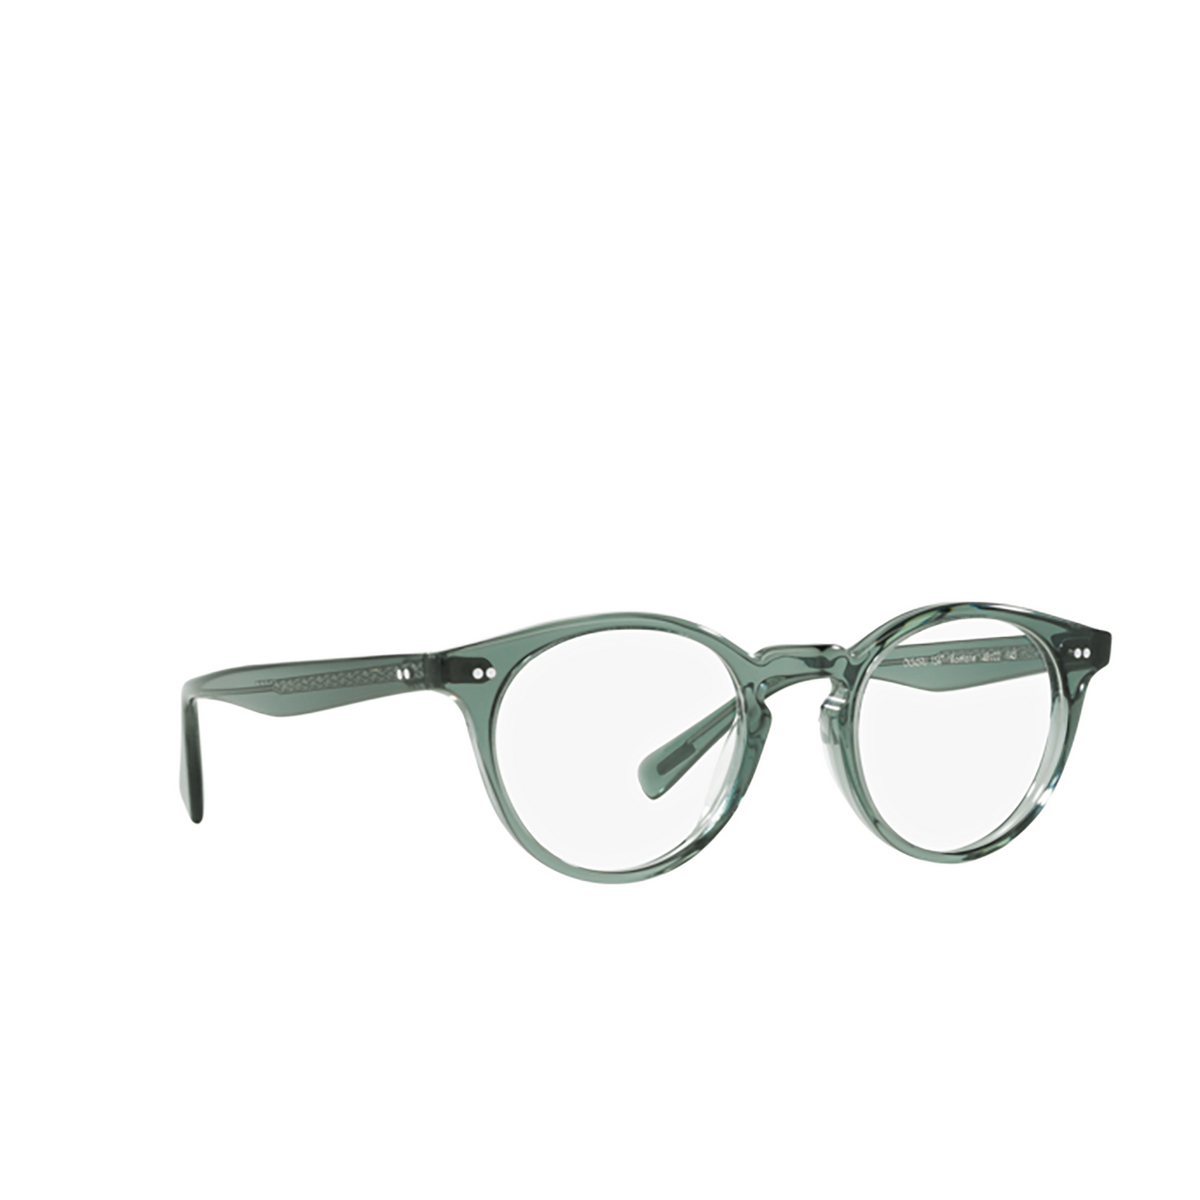 Oliver Peoples ROMARE Eyeglasses 1547 Ivy - three-quarters view